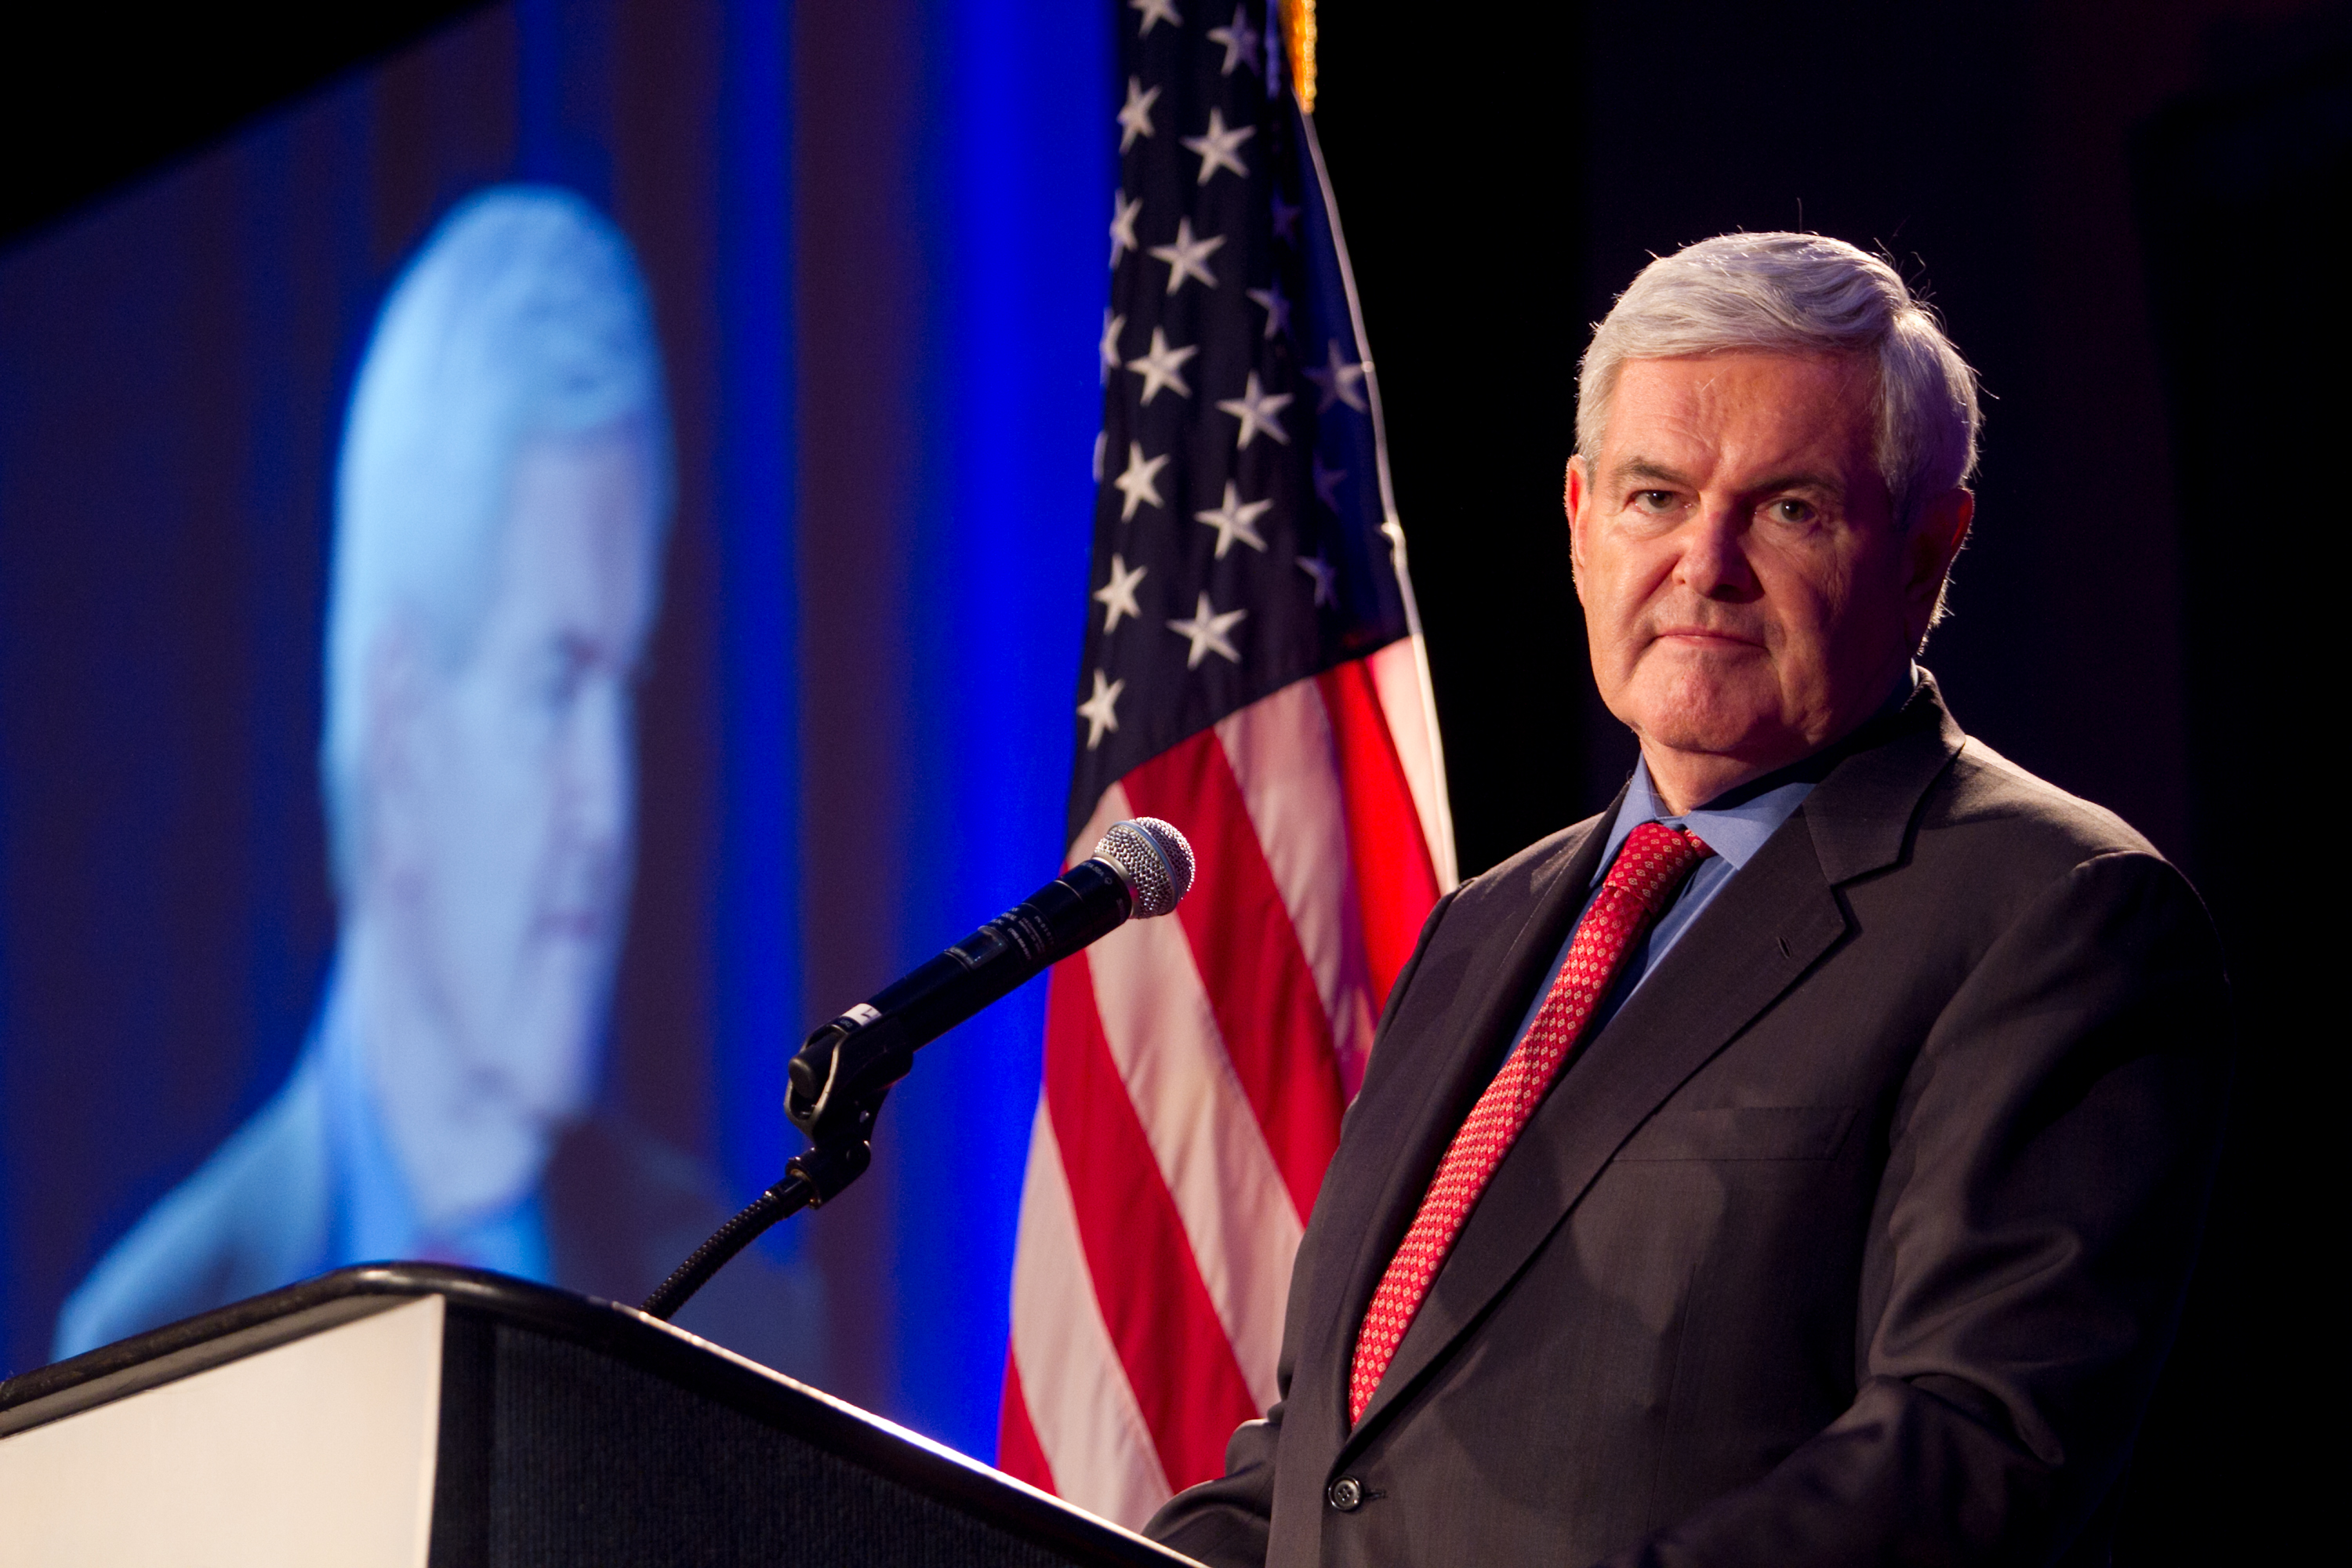 Former House Speaker Newt Gingrich gives the keynote address during the Georgia Republican Party Victory Dinner in Macon, Georgia, on May 13, 2011. (Jessica McGowan—Getty Images)